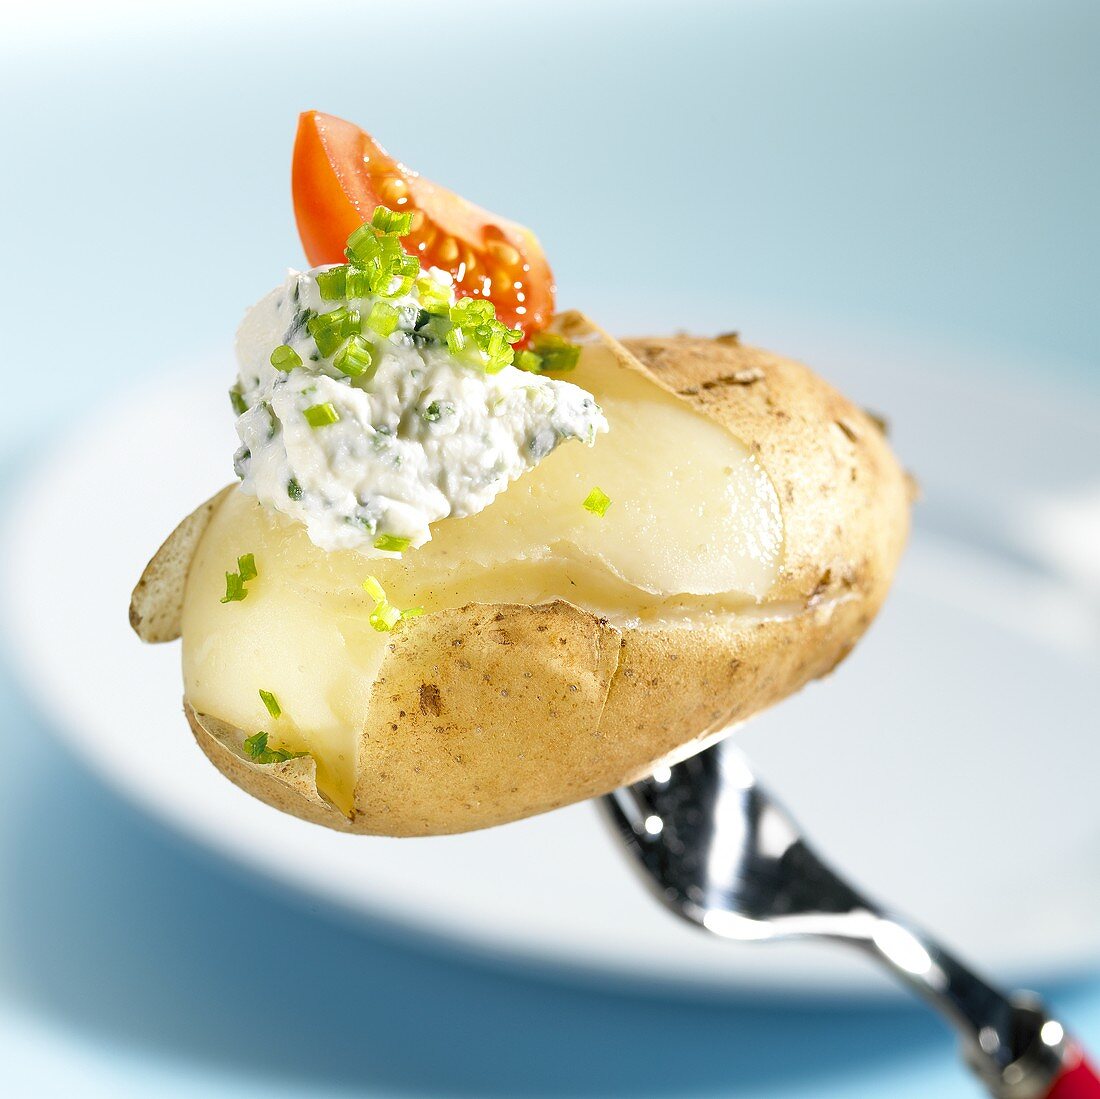 Boiled potato with herb quark and tomato on fork